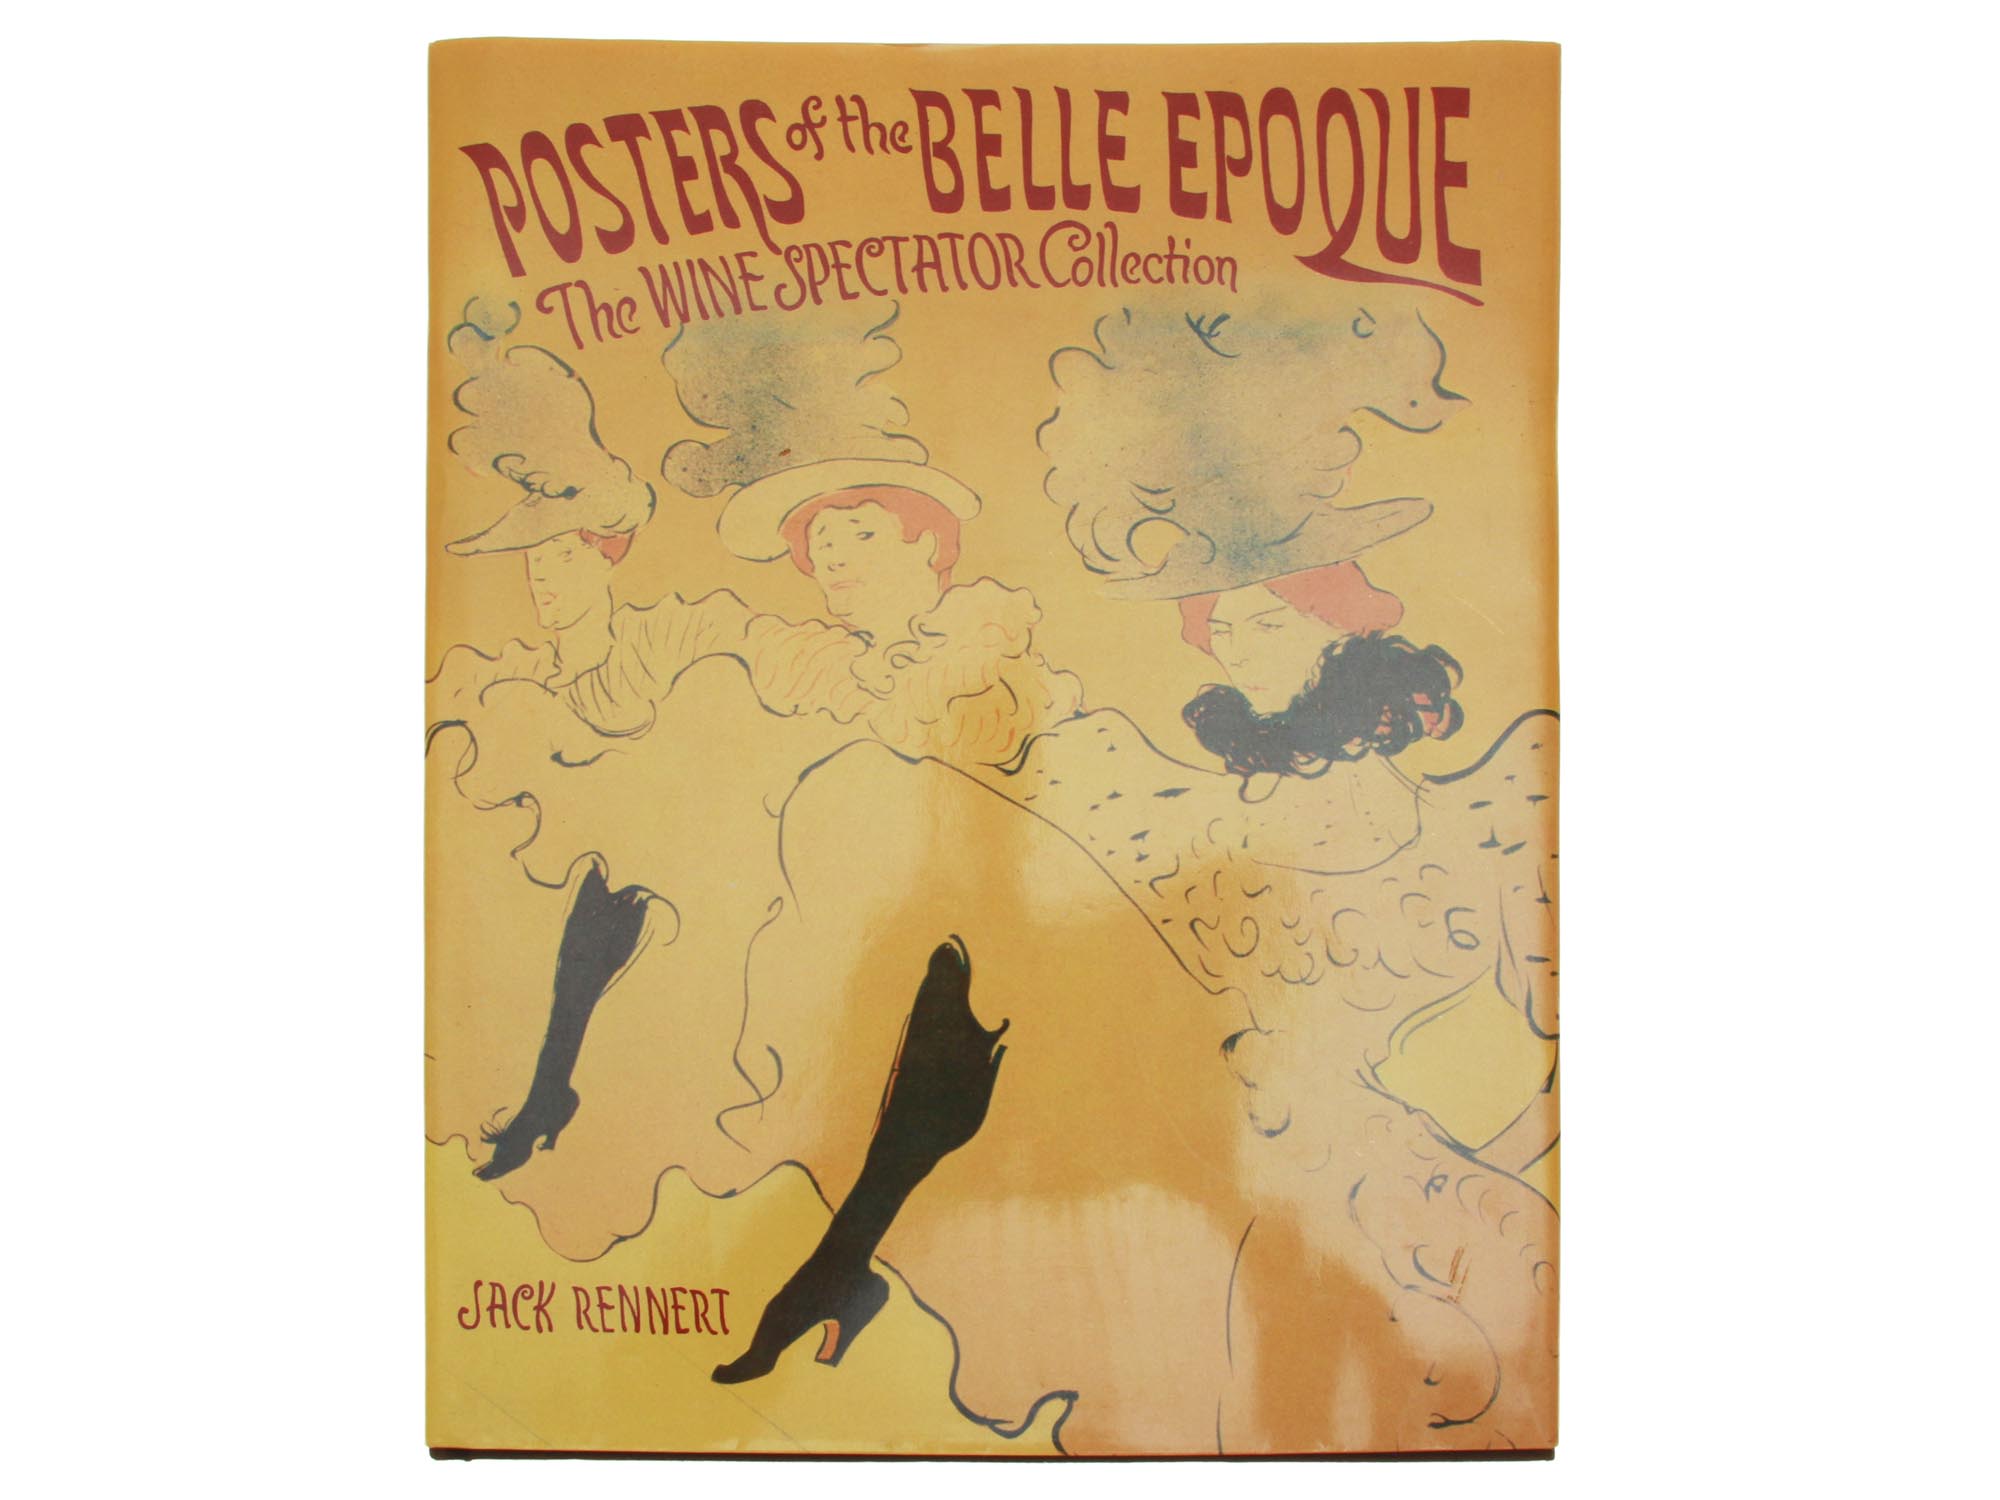 AMERICAN BOOK POSTERS OF BELLE EPOQUE BY RENNERT